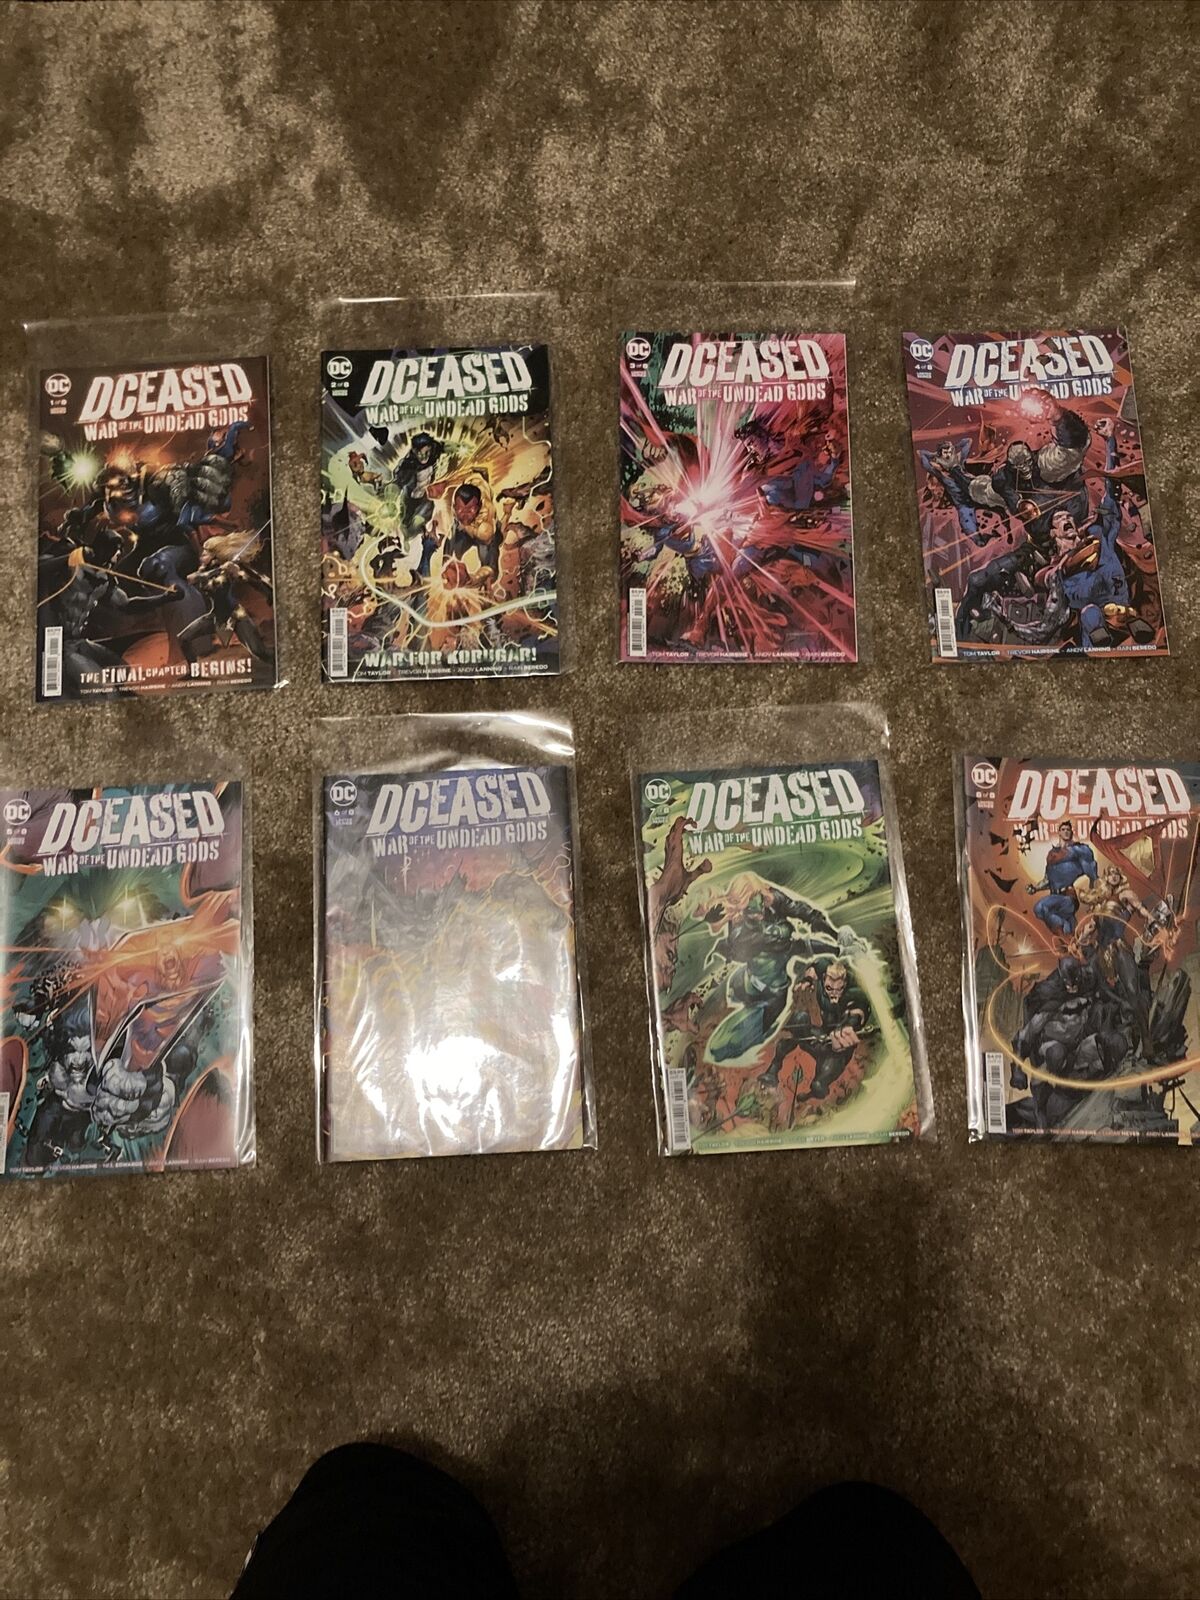 DCEased: War of the Undead Gods (Complete Story)